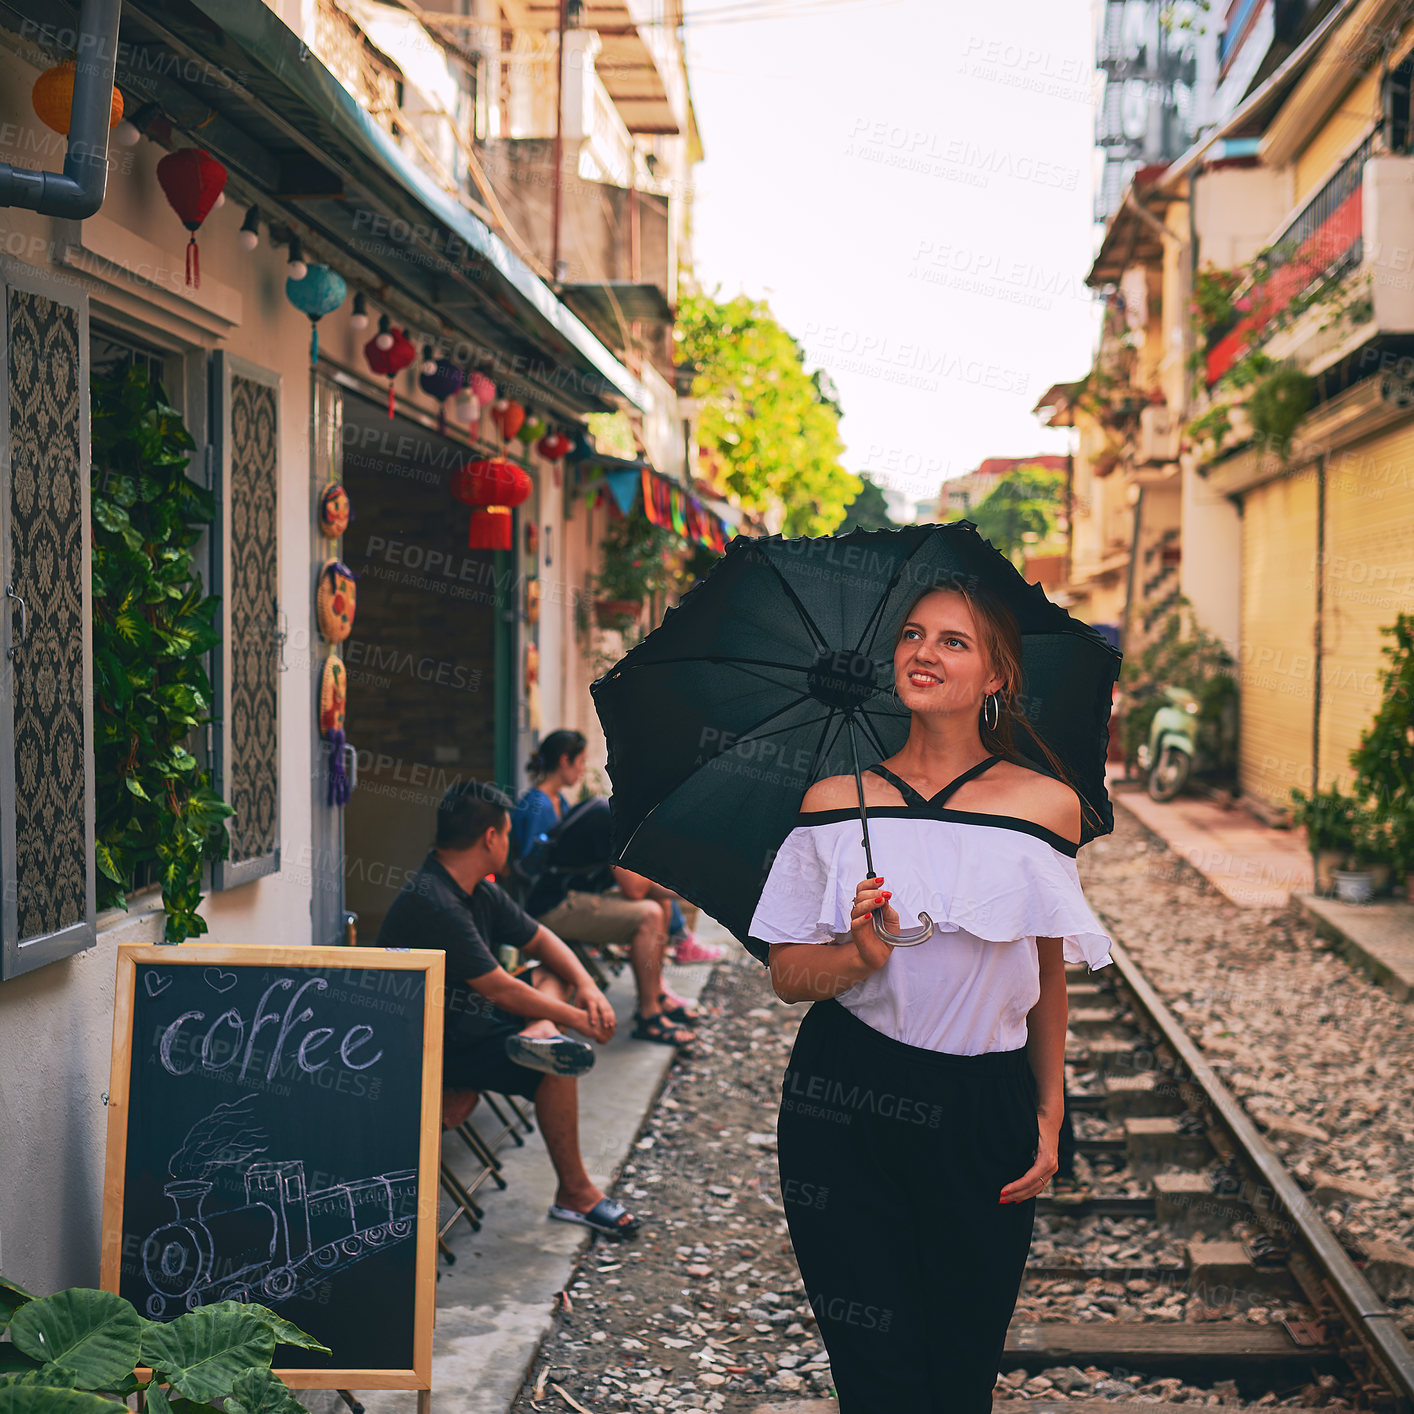 Buy stock photo Shot of a young woman holding an umbrella while exploring a foreign city on a sunny day